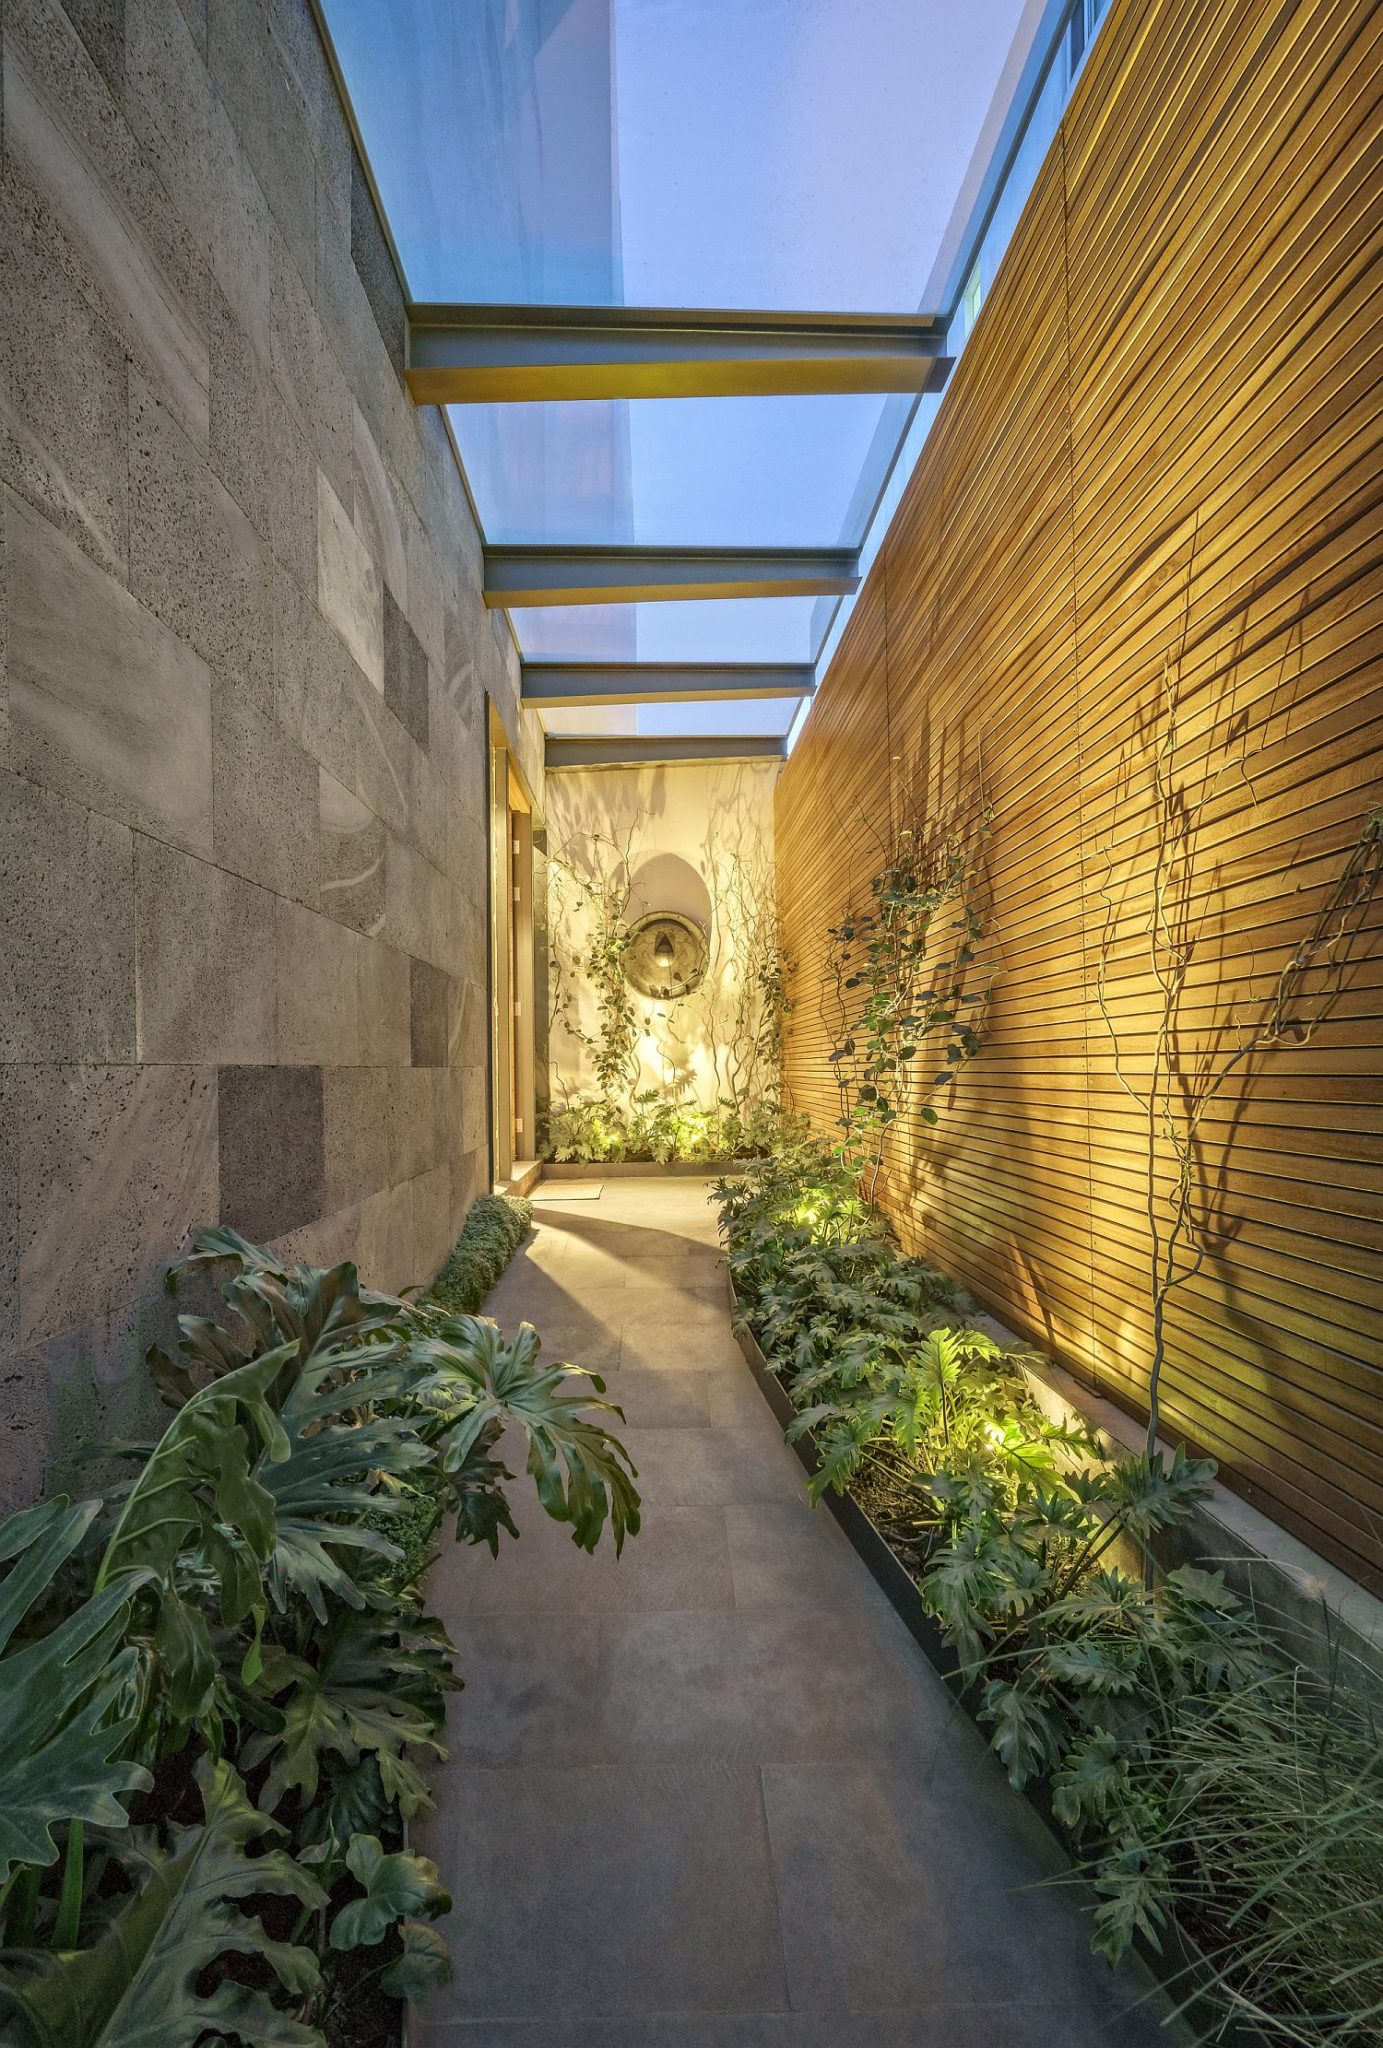 Covered-and-illuminated-walkway-connects-the-central-courtyard-with-the-garden